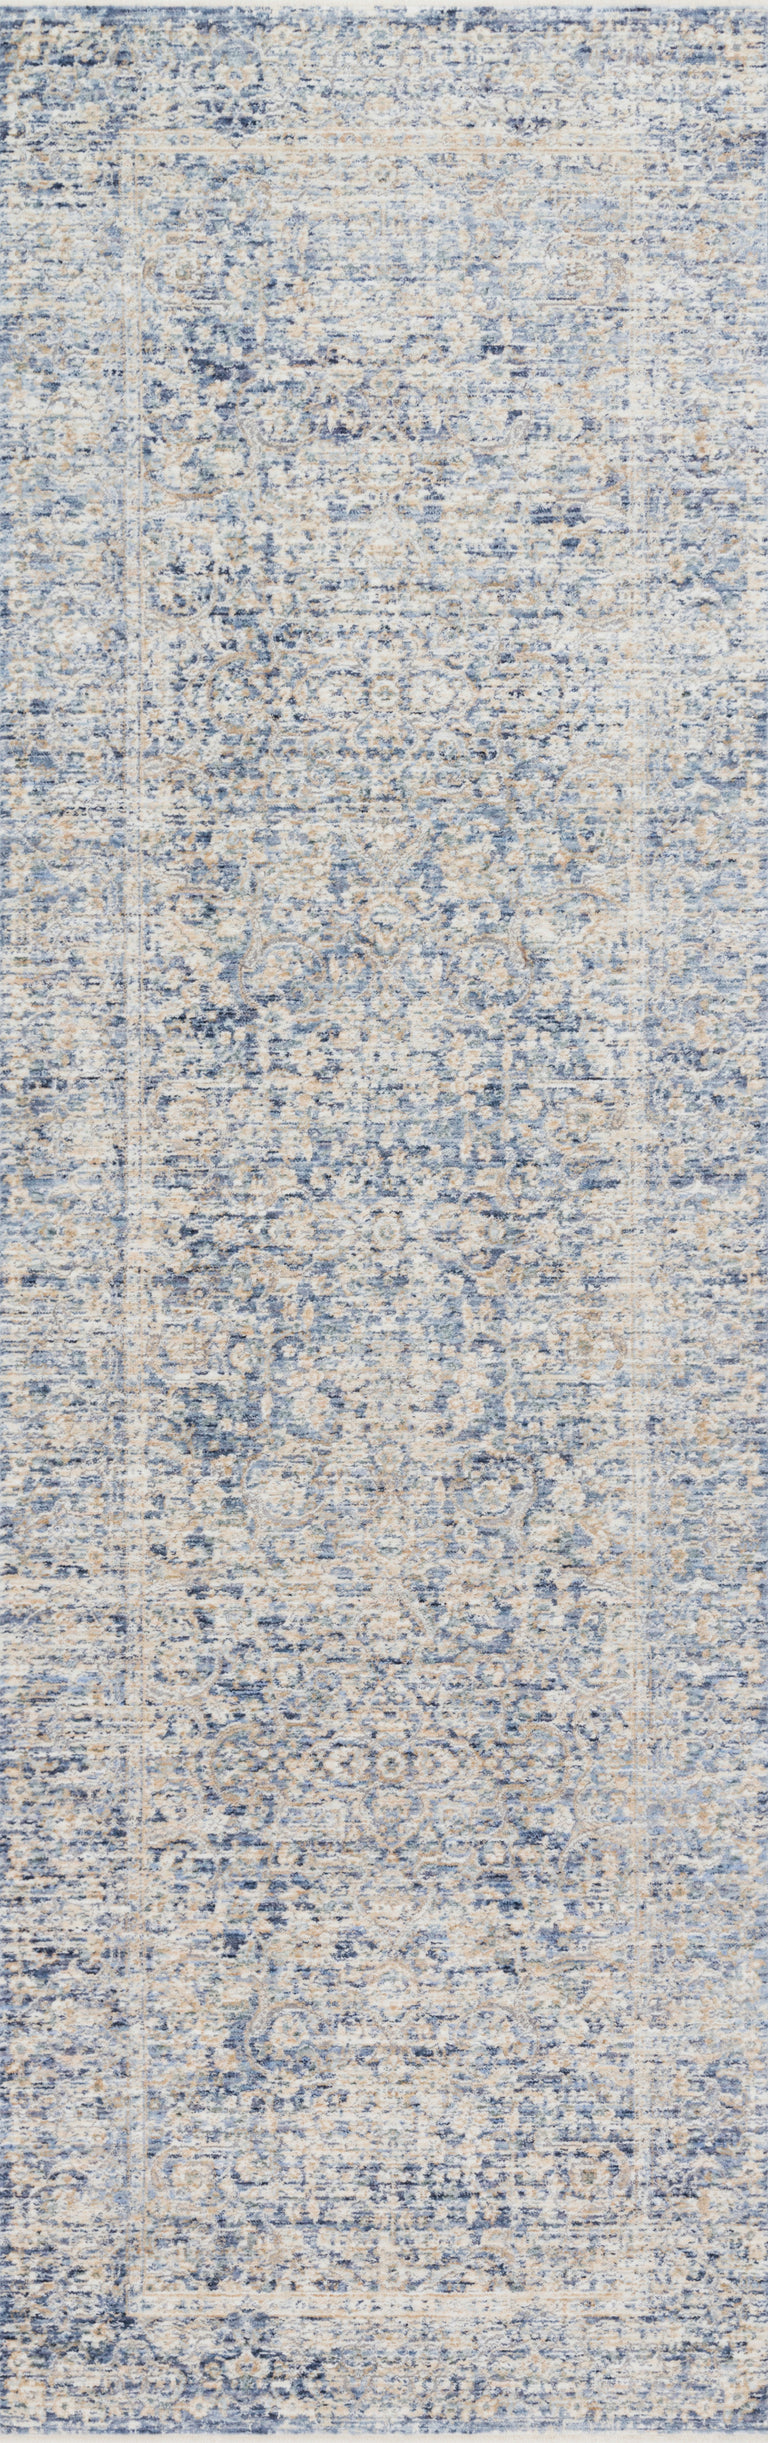 Loloi Rugs Pandora Collection Rug in Blue, Gold - 9'6" x 12'5", PANDPAN-01BBGO96C5